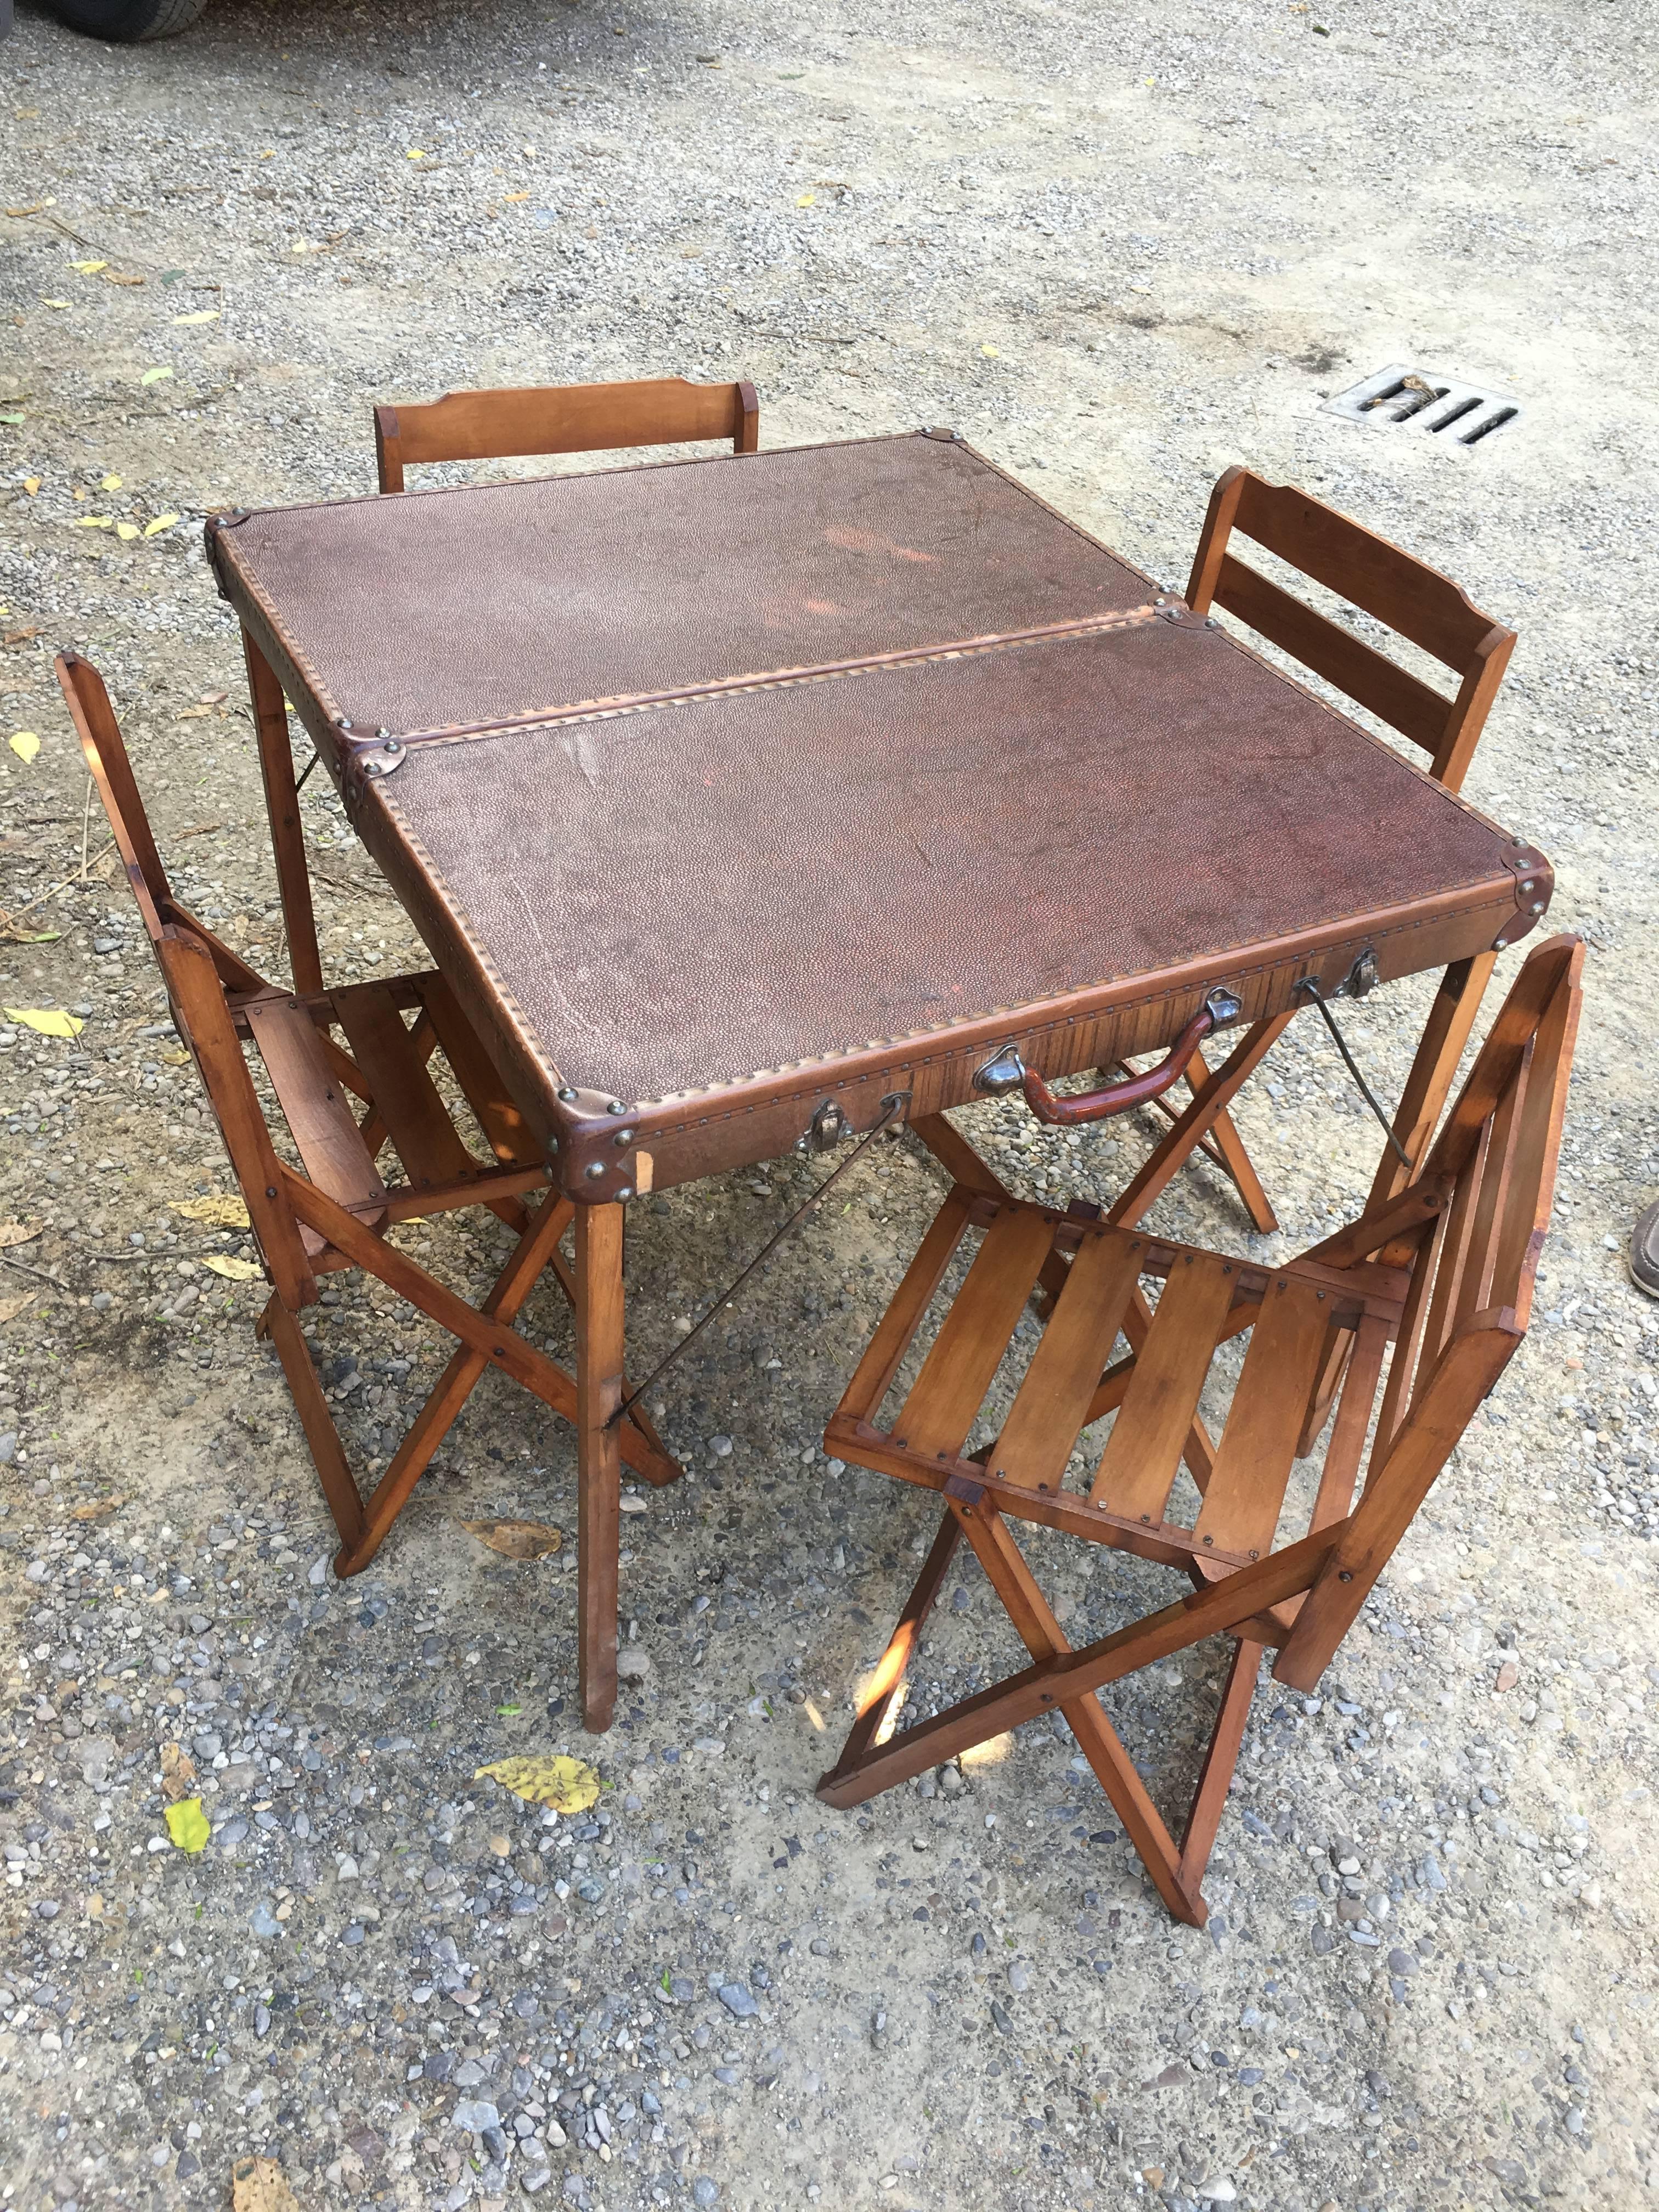 Italian picnic folding table with chairs from 1950s
When closed, the table becomes a baggage and contains the four chairs.
Measurements:
Table when opened: cm.85 x 75 x H 70
Table when closed: cm.43 x 74 x H 14.
 